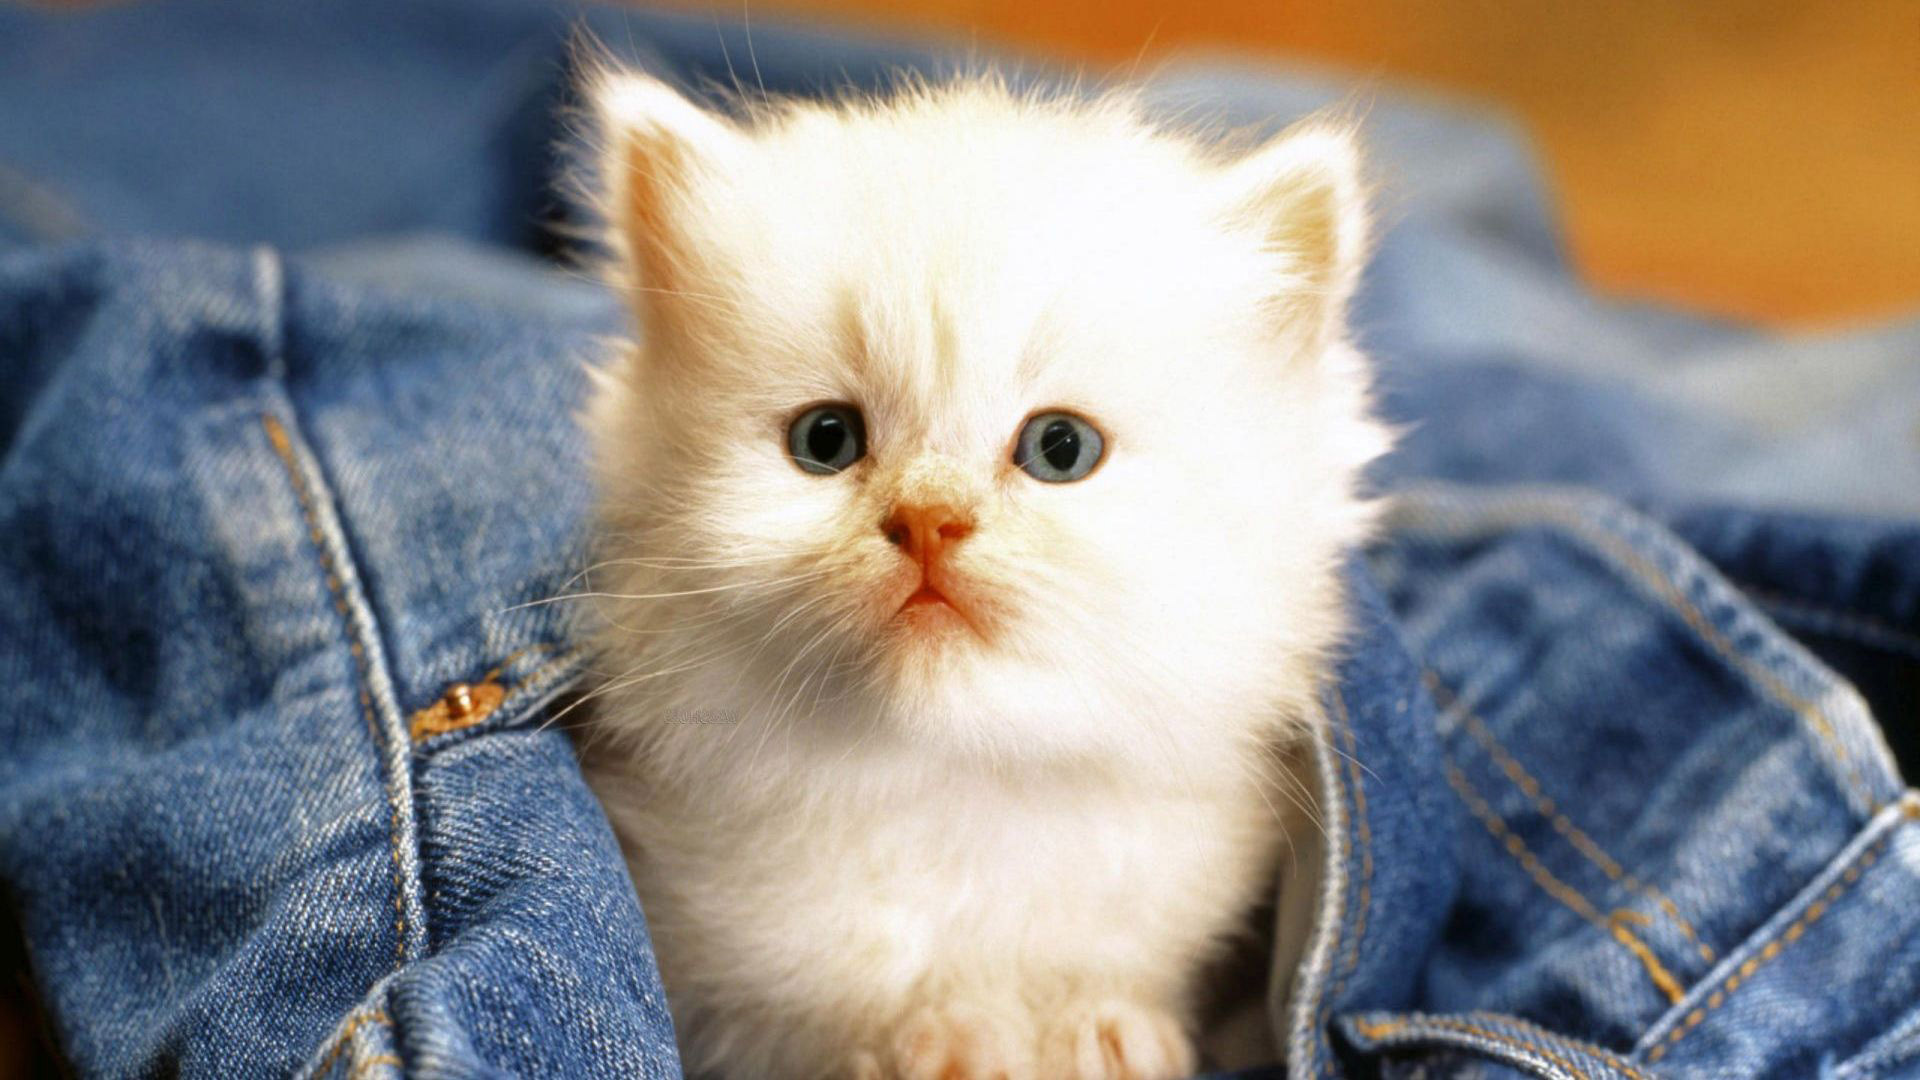 Cats Wallpapers Cute Cats And Kittens Wallpapers For - Best Cat Images  Download - 1920x1080 Wallpaper 